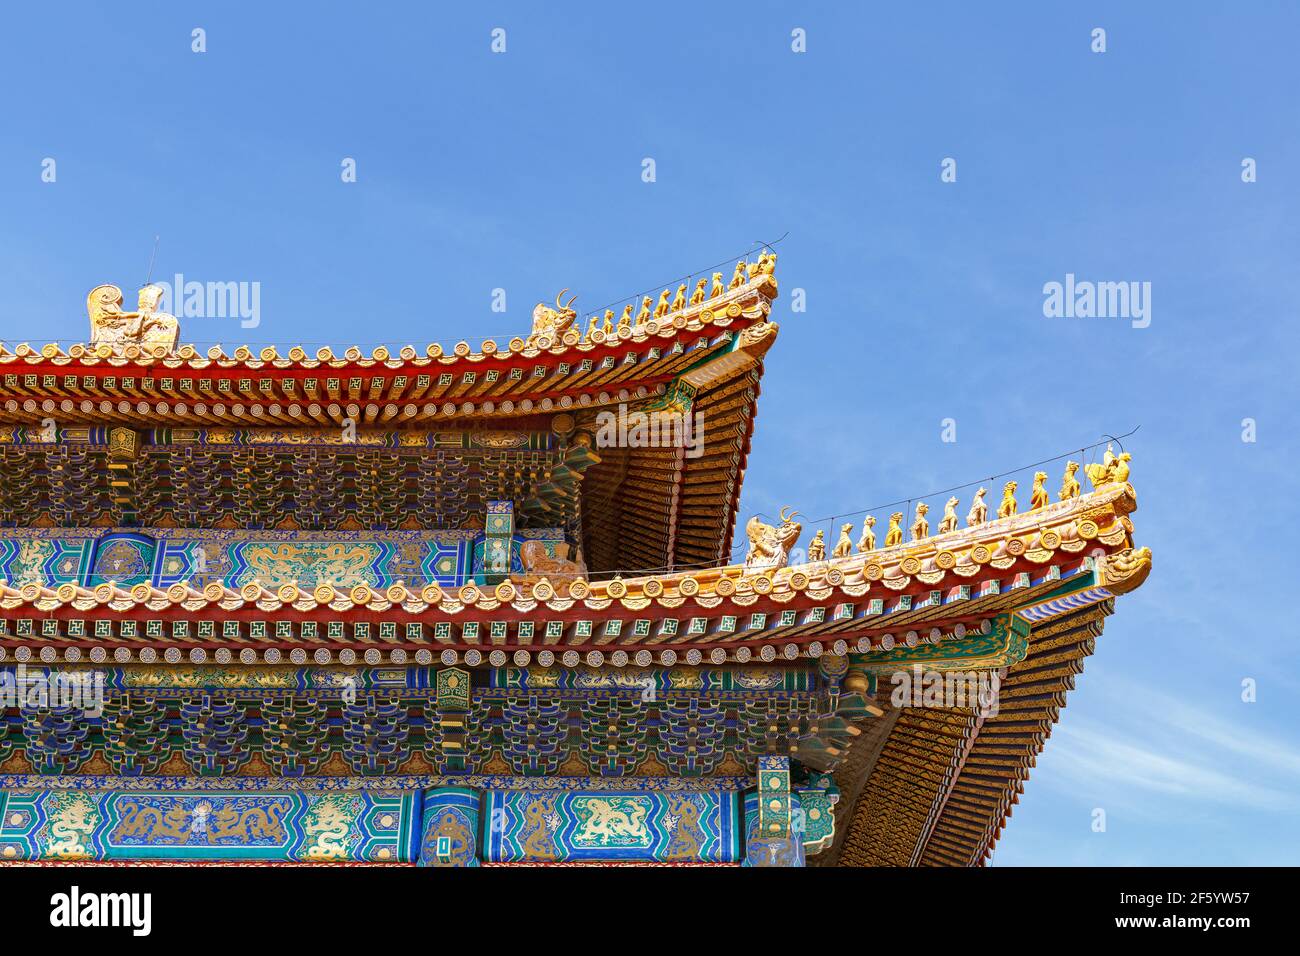 Rooftops and eaves on palace buildings at the Forbidden City in Beijing, China in March 2018. Stock Photo